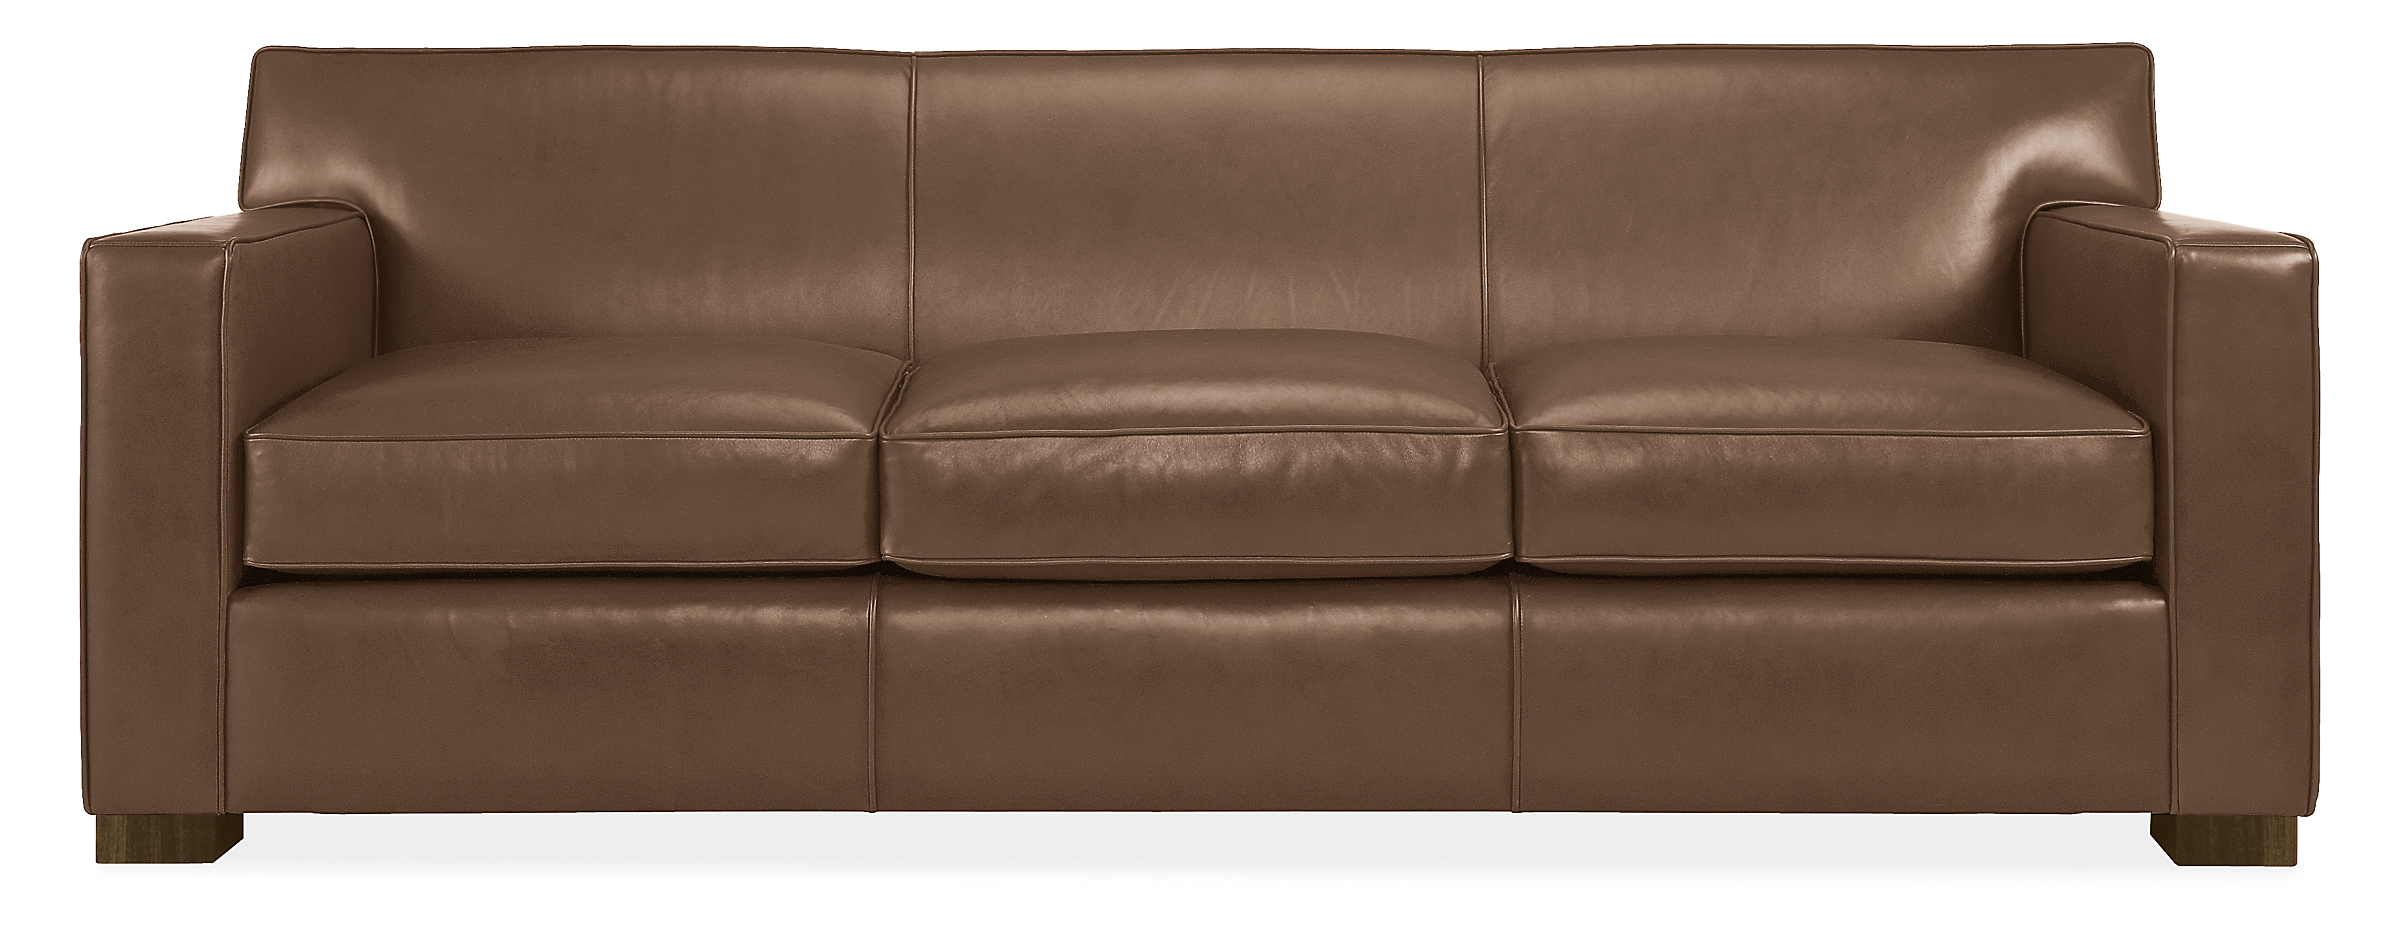 Dean 88" Sofa in Vento Pewter Leather